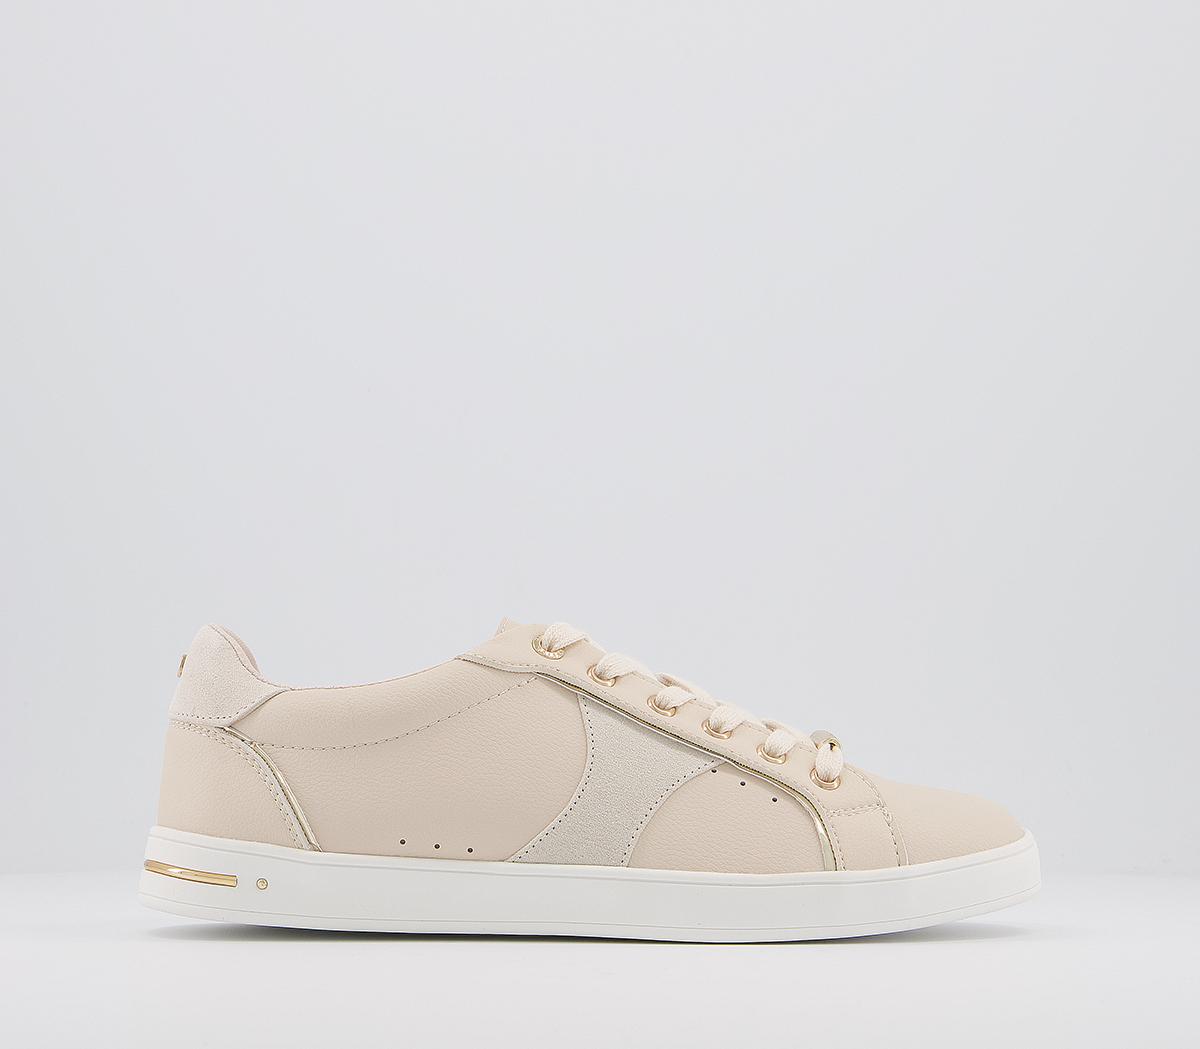 OFFICEForce Feature Side Details Lace Up TrainersOff White Nude Mix